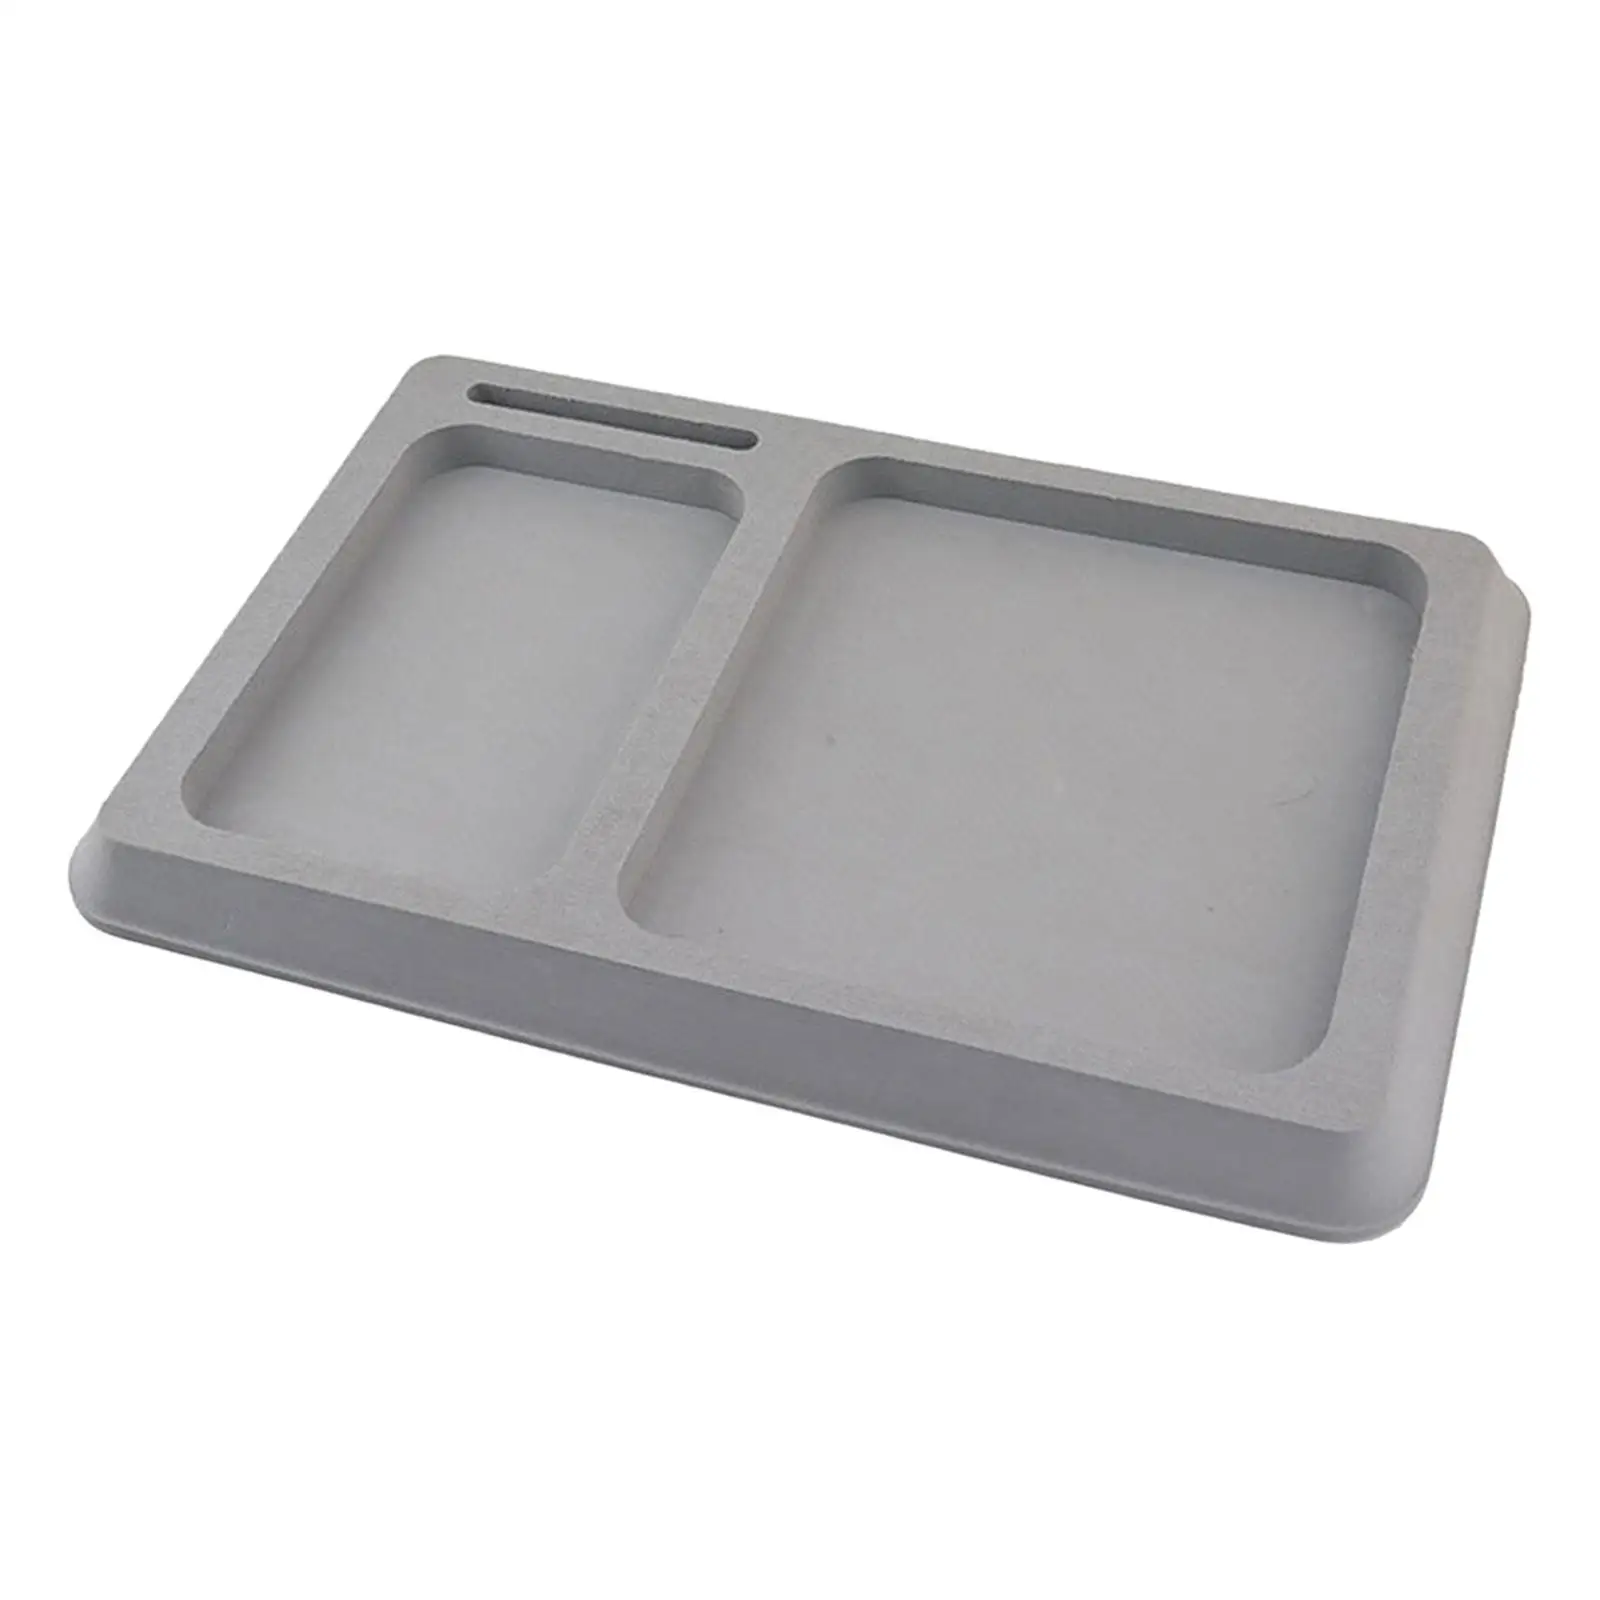 Phone Boat Dash Anti Skid Easy to Install Spare Multifunction Supplies Tray Box for Fishing Keys Marine Phone Small Items